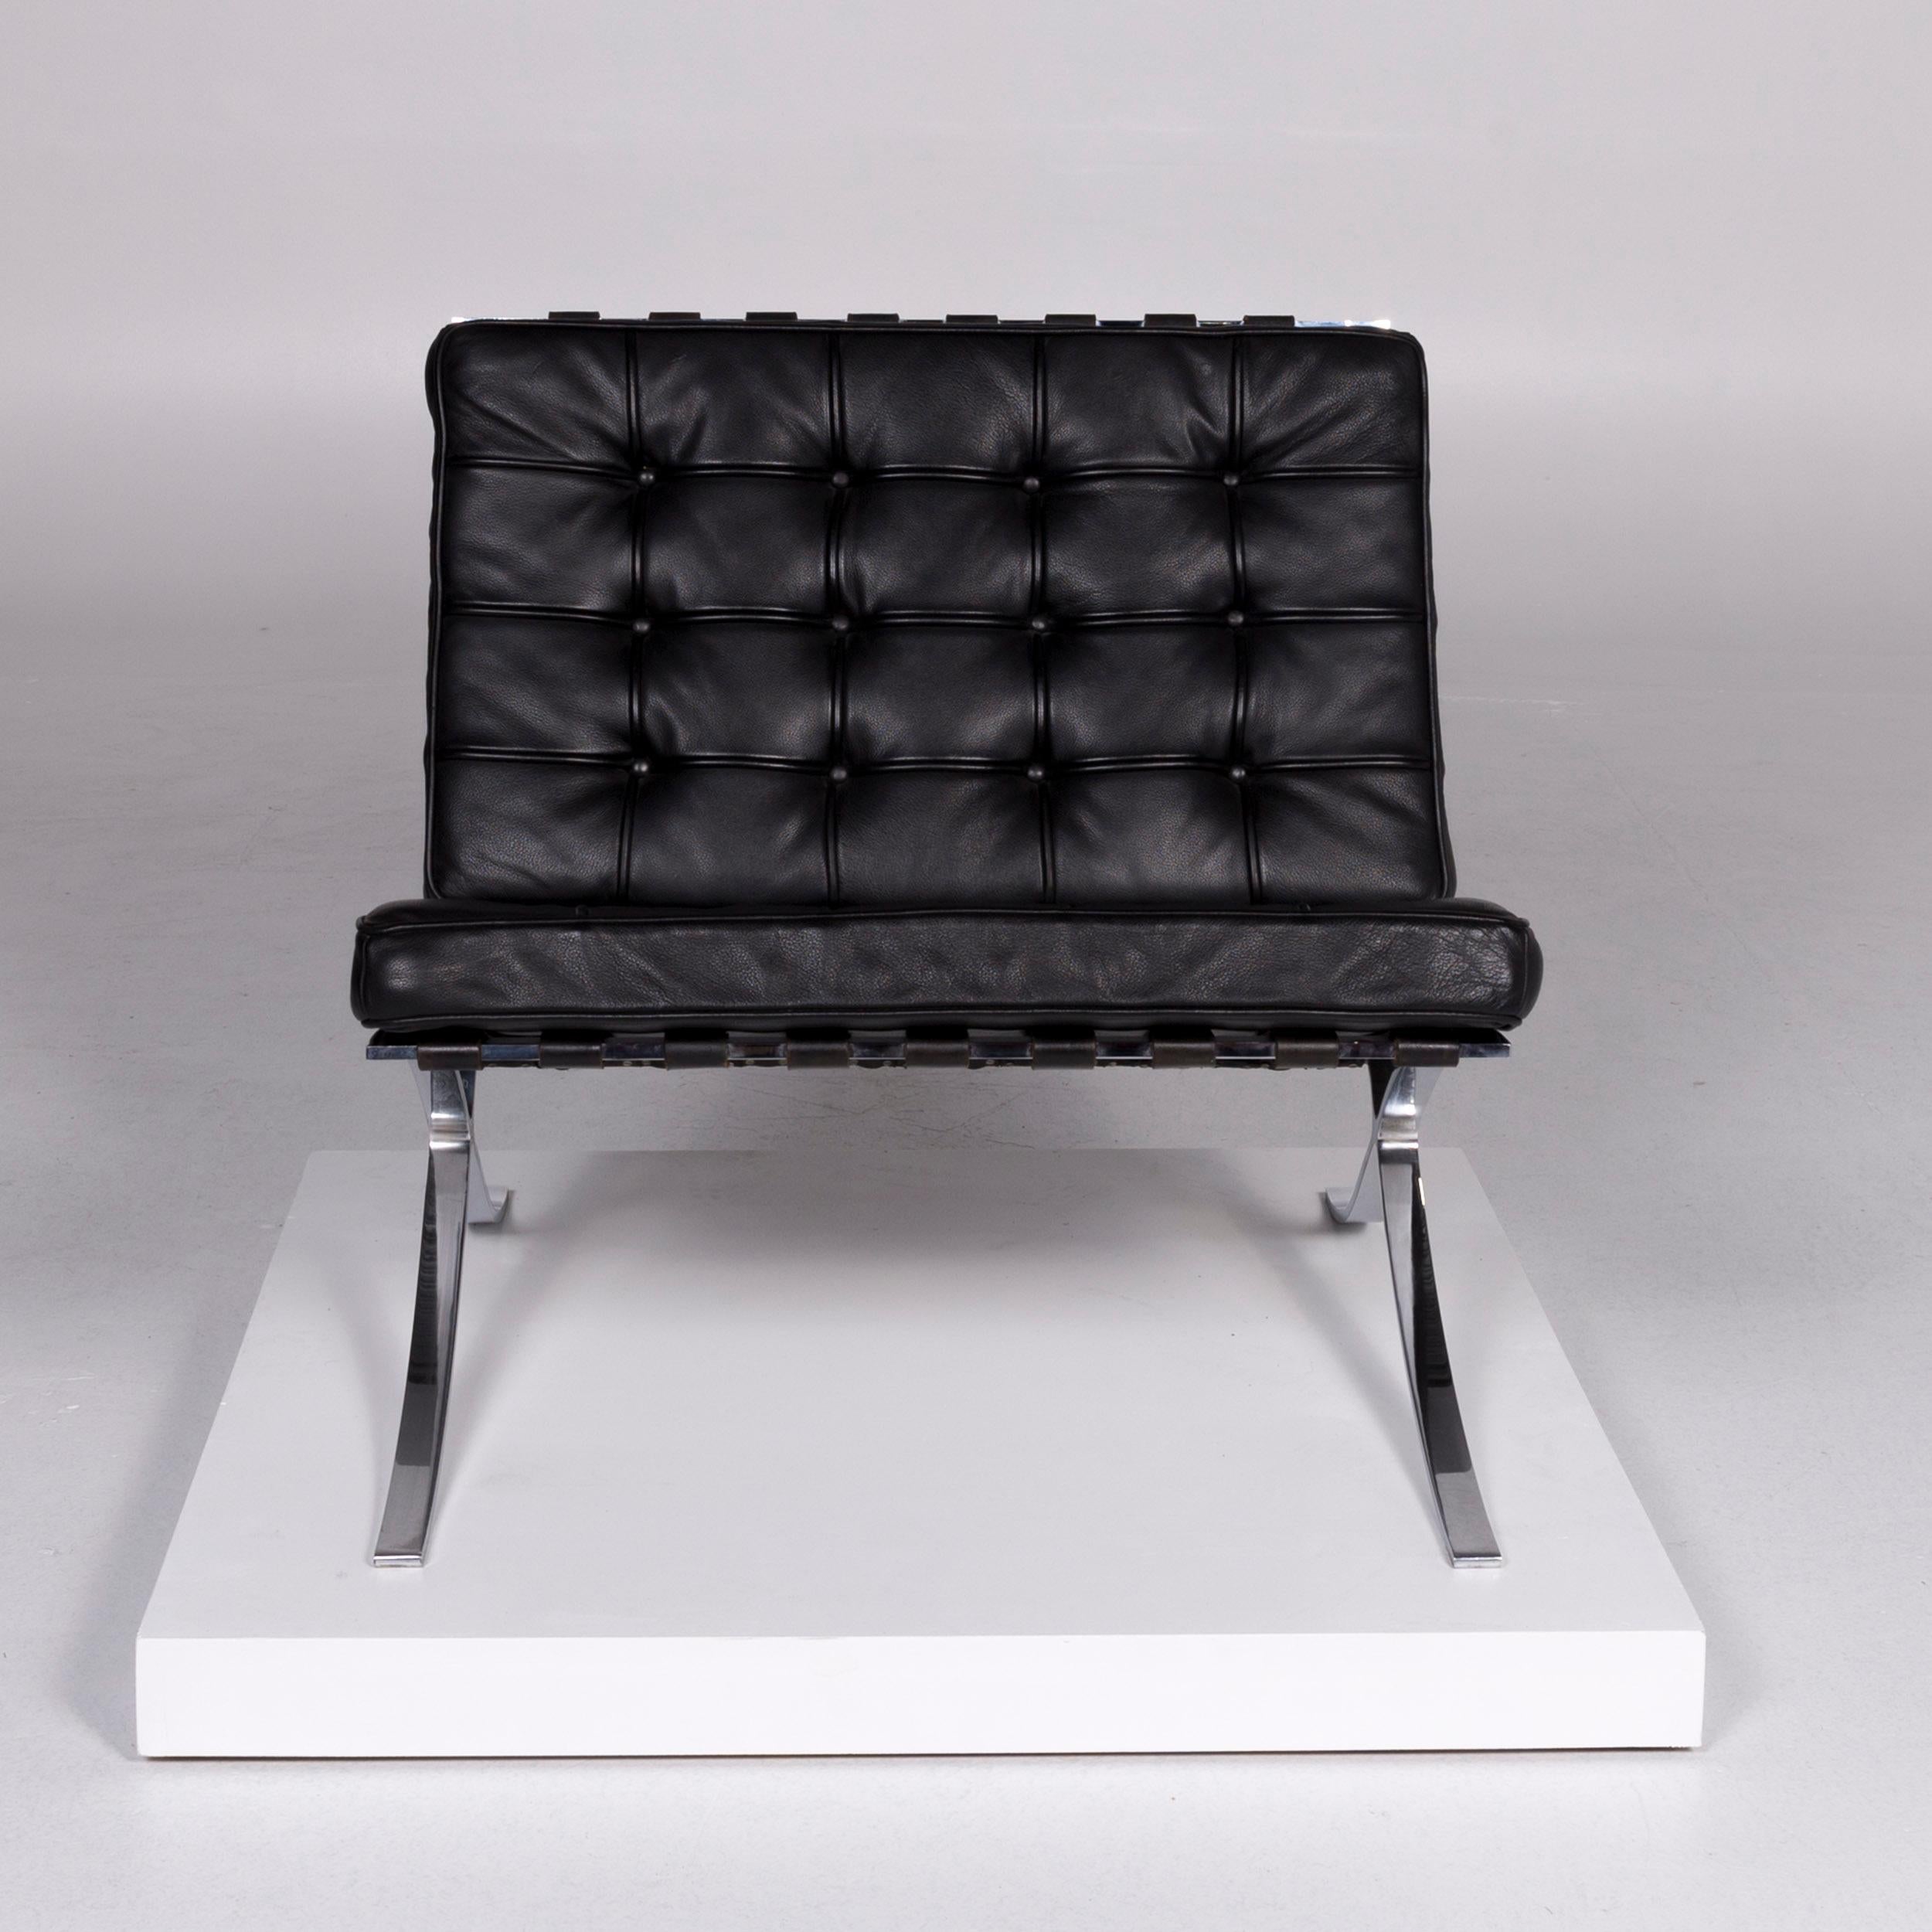 We bring to you a Knoll International Barcelona chair vintage designer leather armchair set black.
 
 Product measurements in centimeters:
 
Depth 80
Width 76
Height 74
Seat-height 39
Seat-depth 51
Seat-width 76
Back-height 42.

 